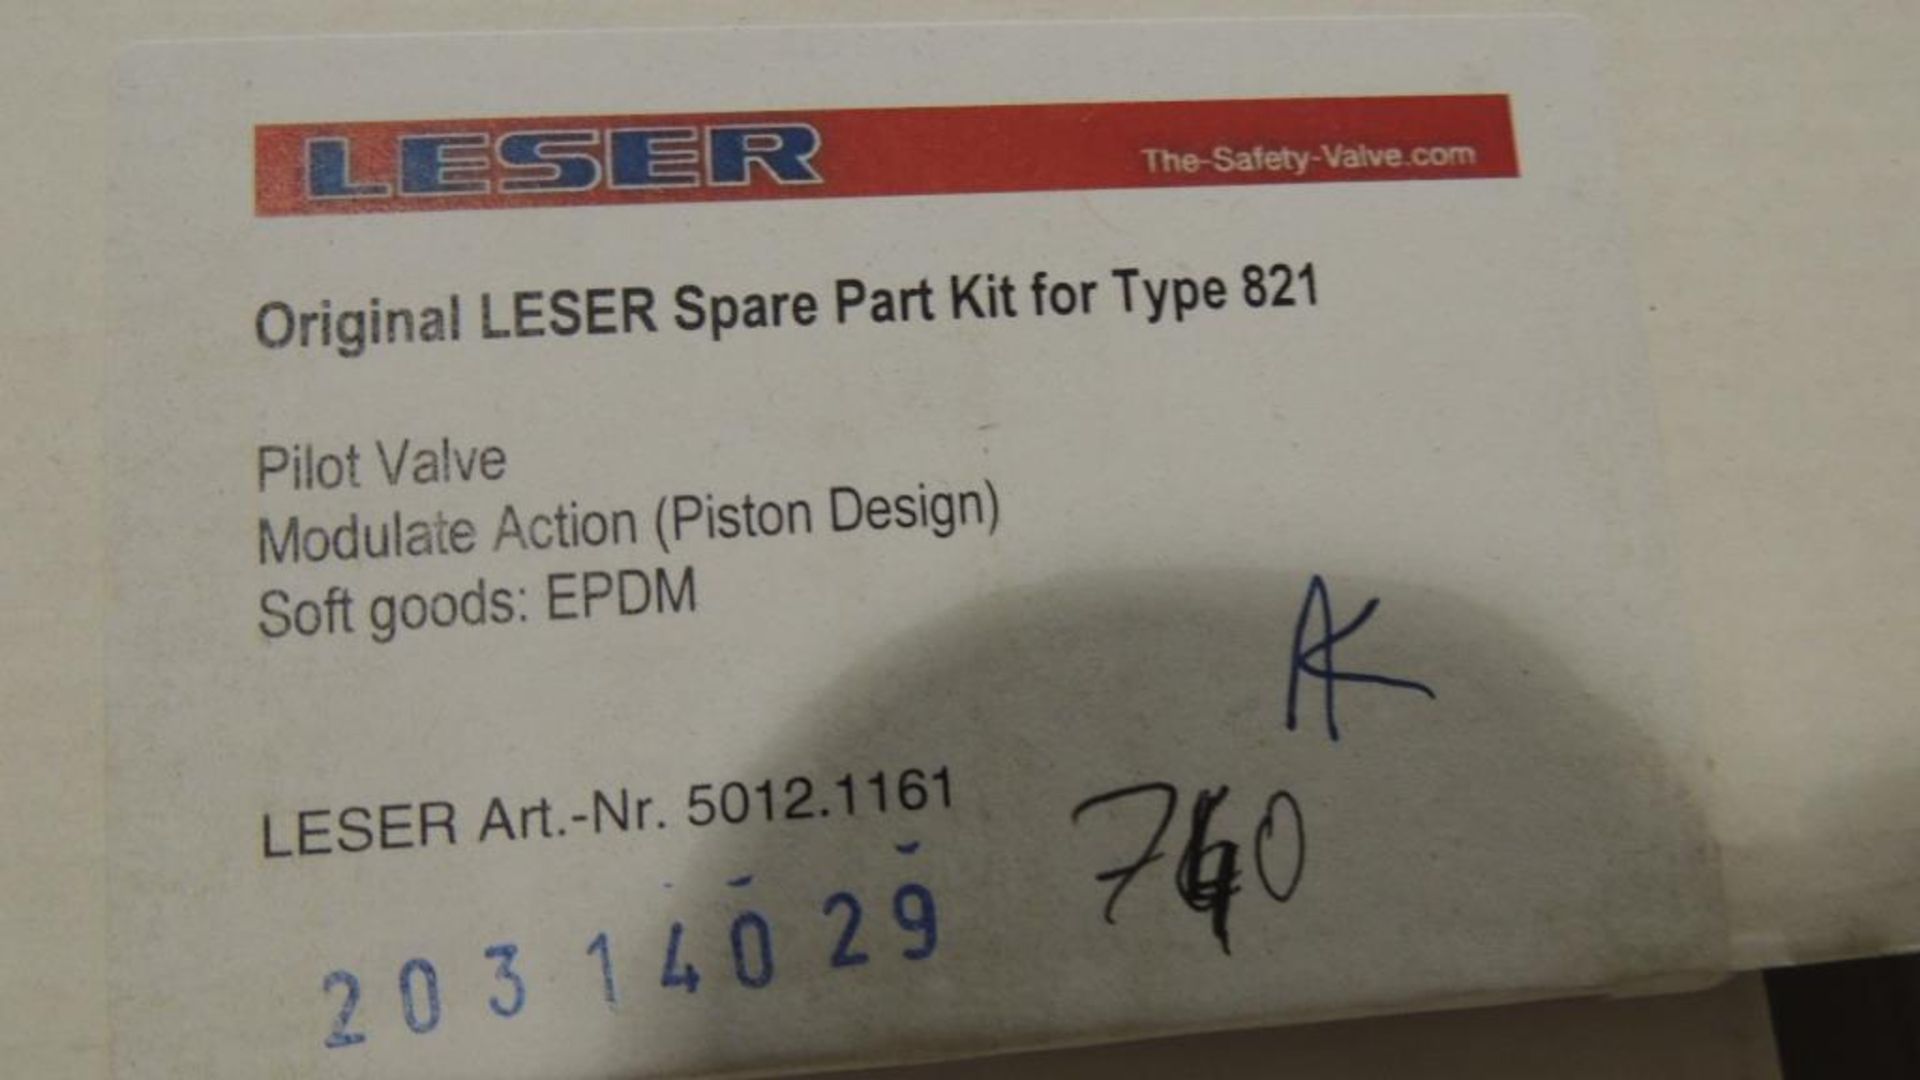 Large Quantity of Leser Relief and Safety Valves, plus Spare Parts Kits - Image 16 of 374